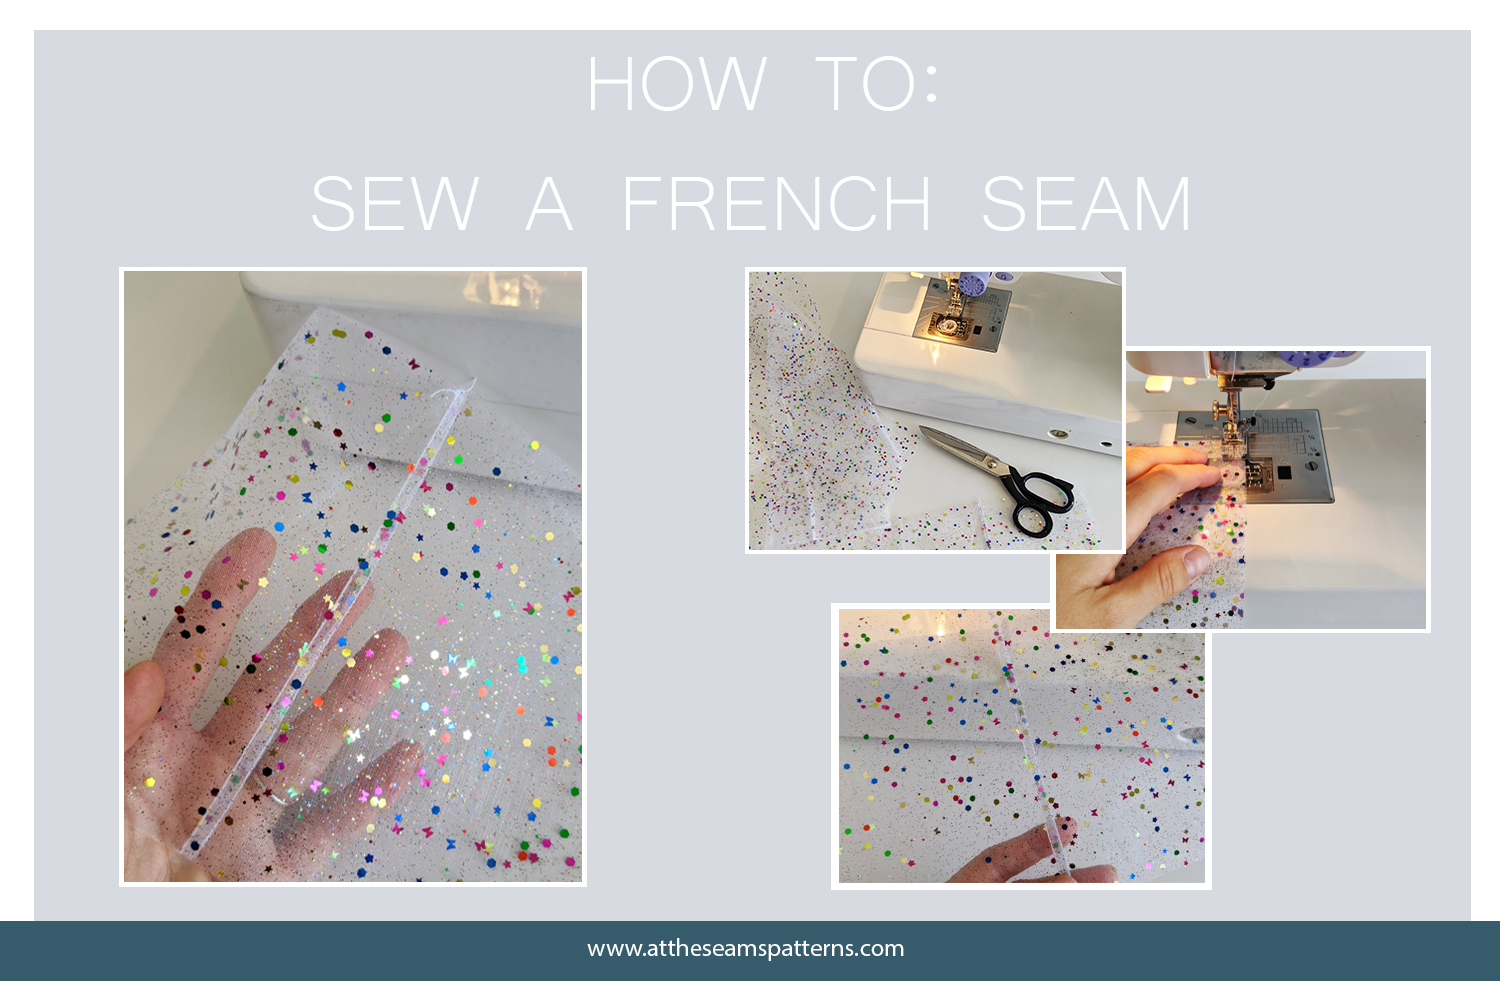 At The Seams Patterns - How to: Sew a French Seam